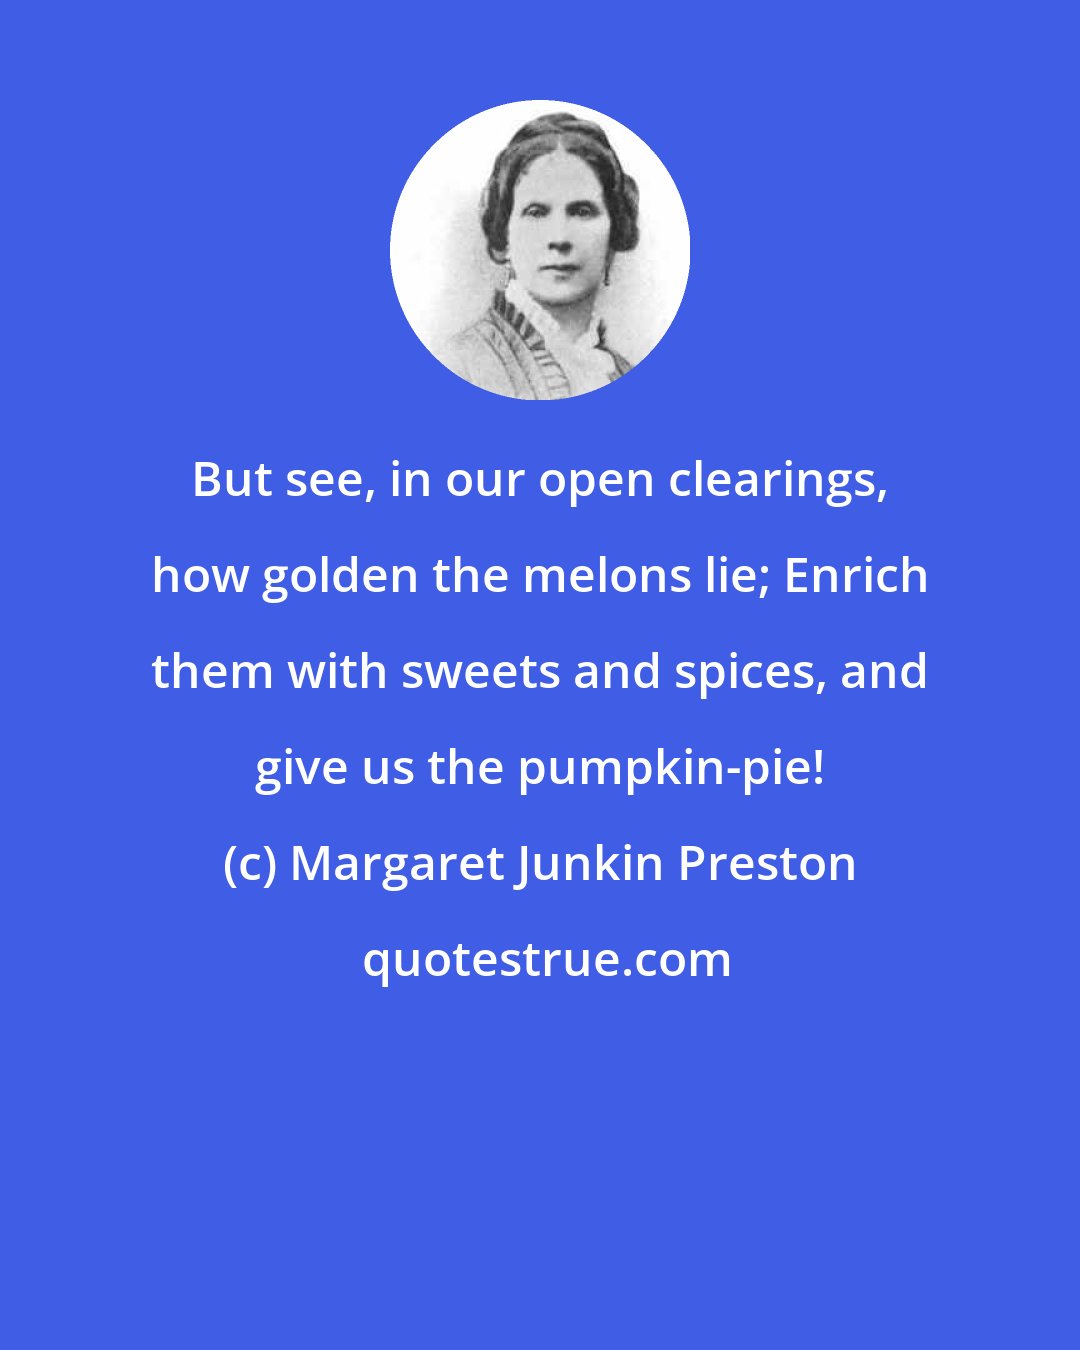 Margaret Junkin Preston: But see, in our open clearings, how golden the melons lie; Enrich them with sweets and spices, and give us the pumpkin-pie!